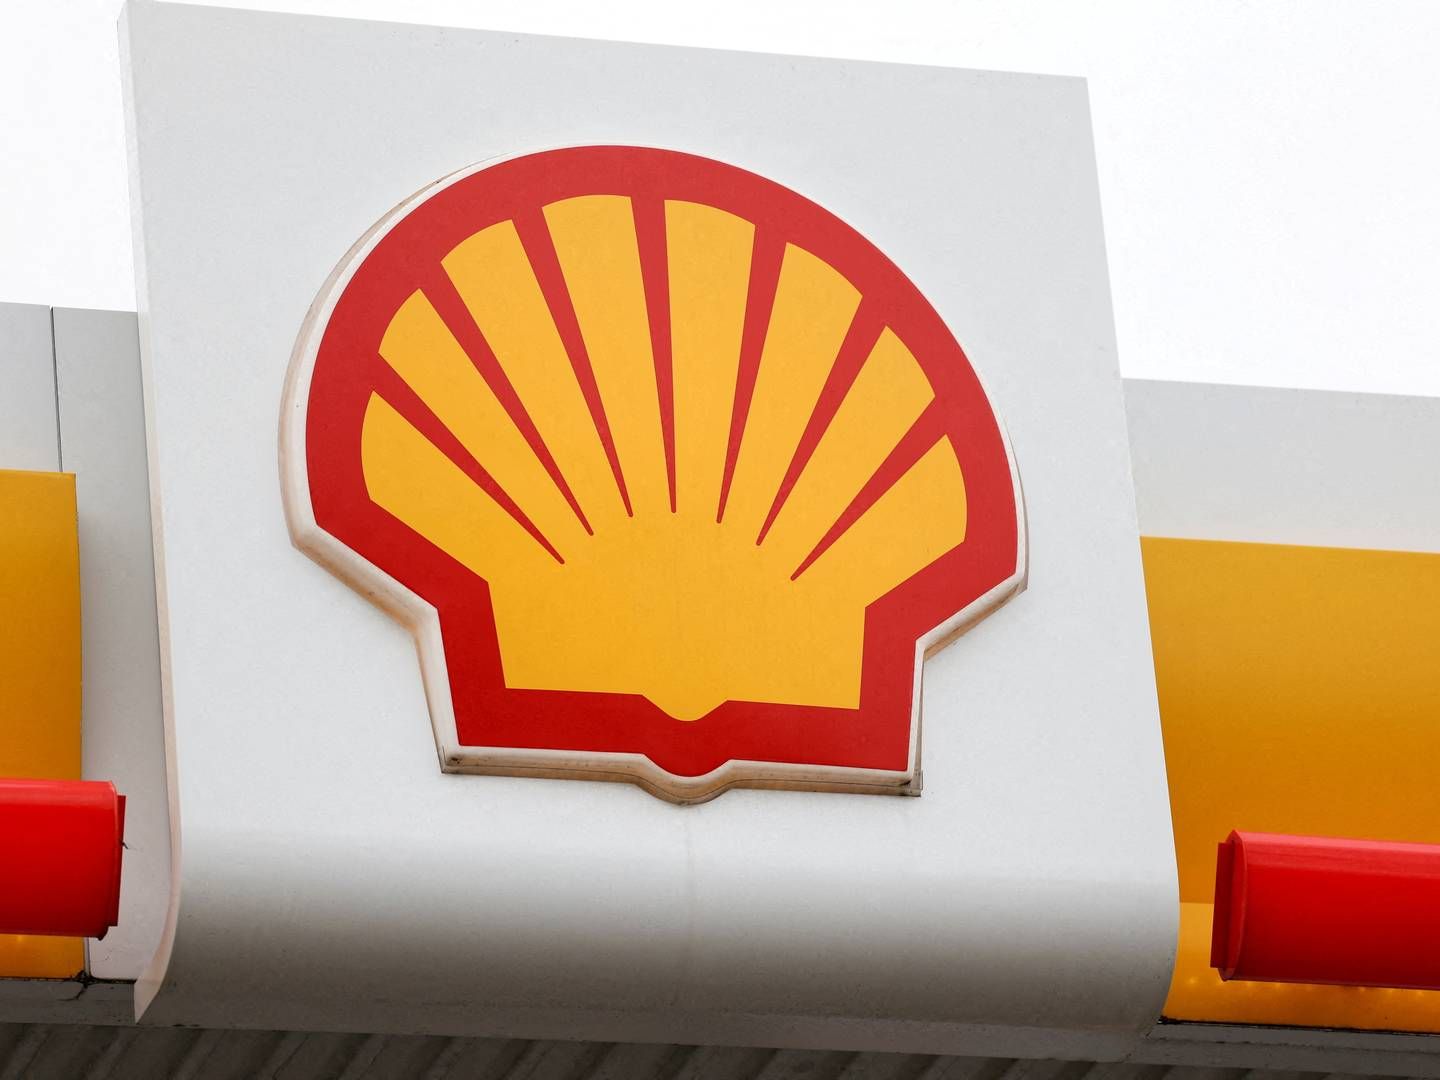 Shell will commence its annual general meeting today, Tuesday. | Foto: May James/Reuters/Ritzau Scanpix